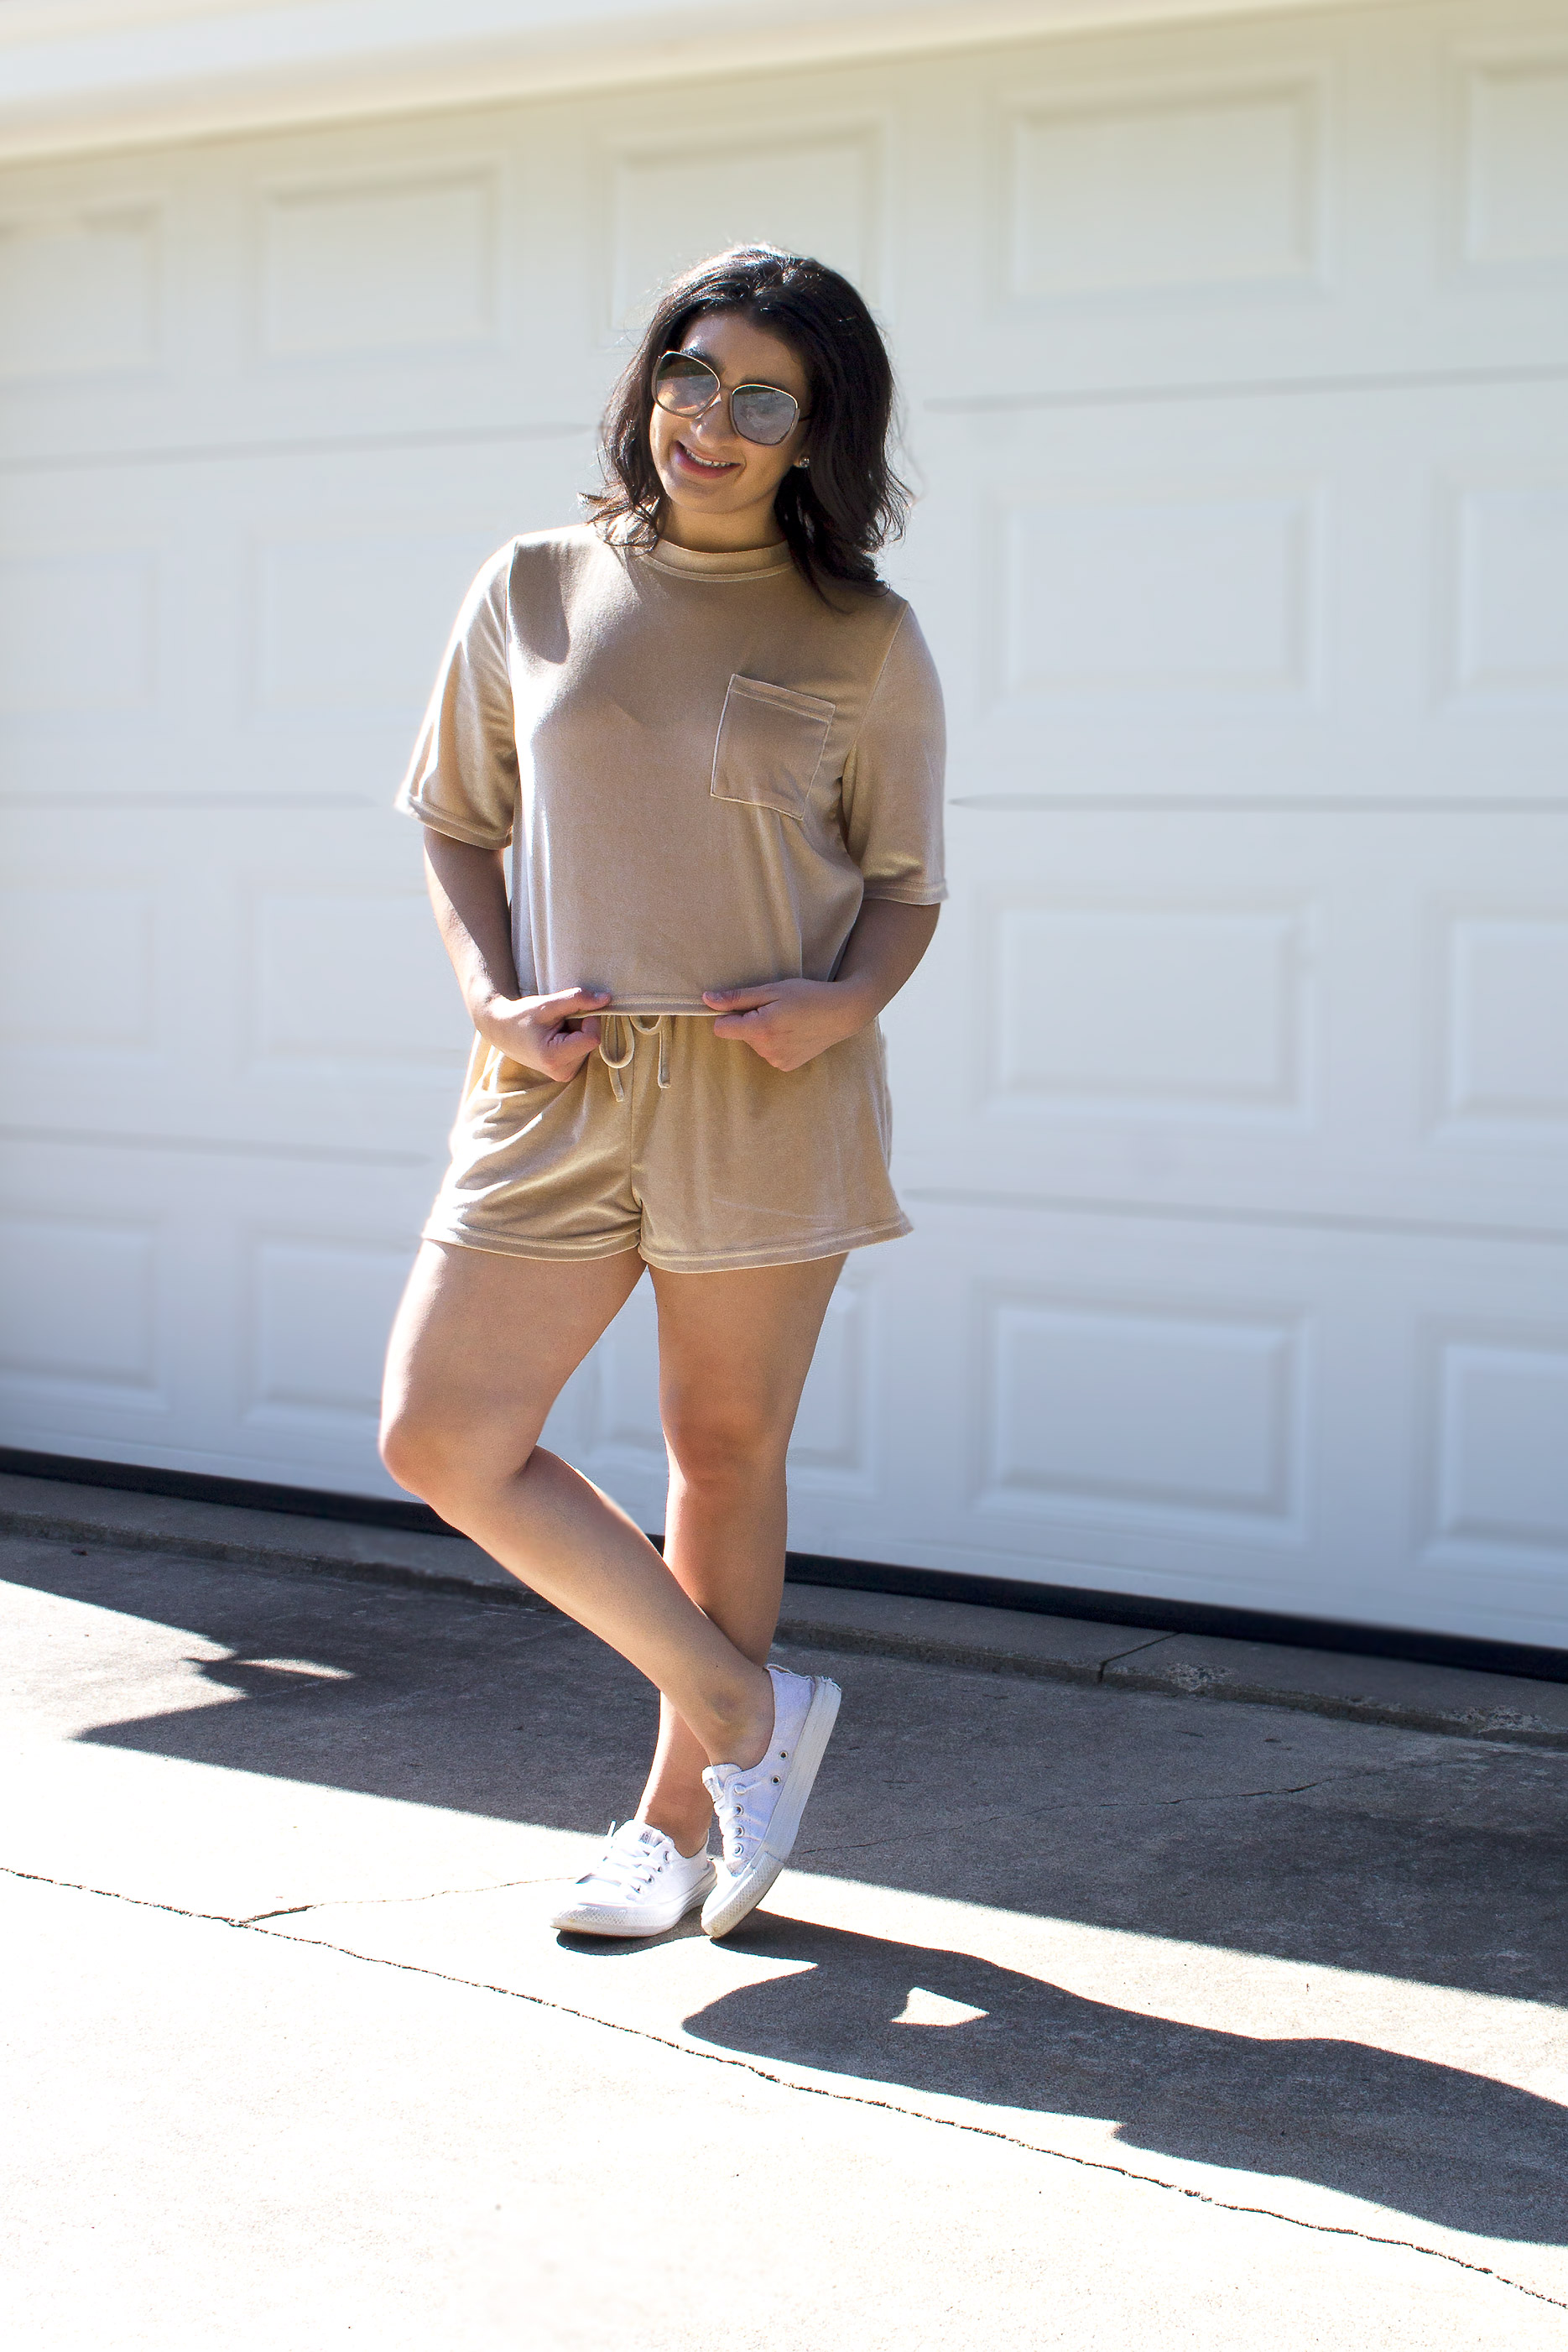 Staying on Trend with SheIn